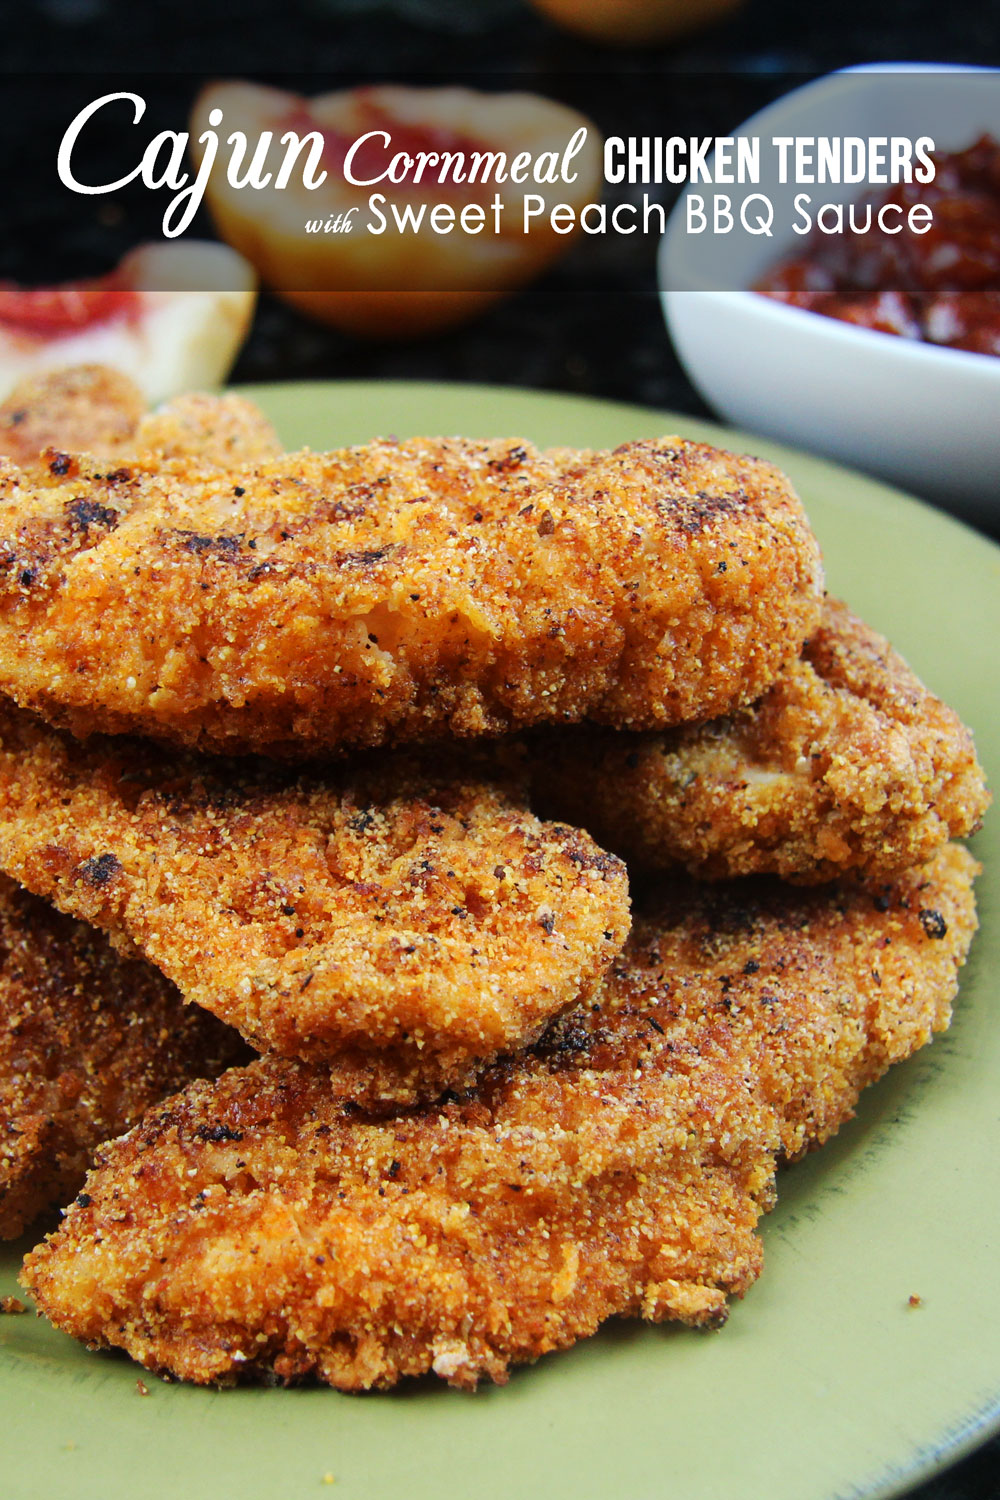 Spicy Cajun Chicken Tenders With Sweet Peach Barbecue Sauce